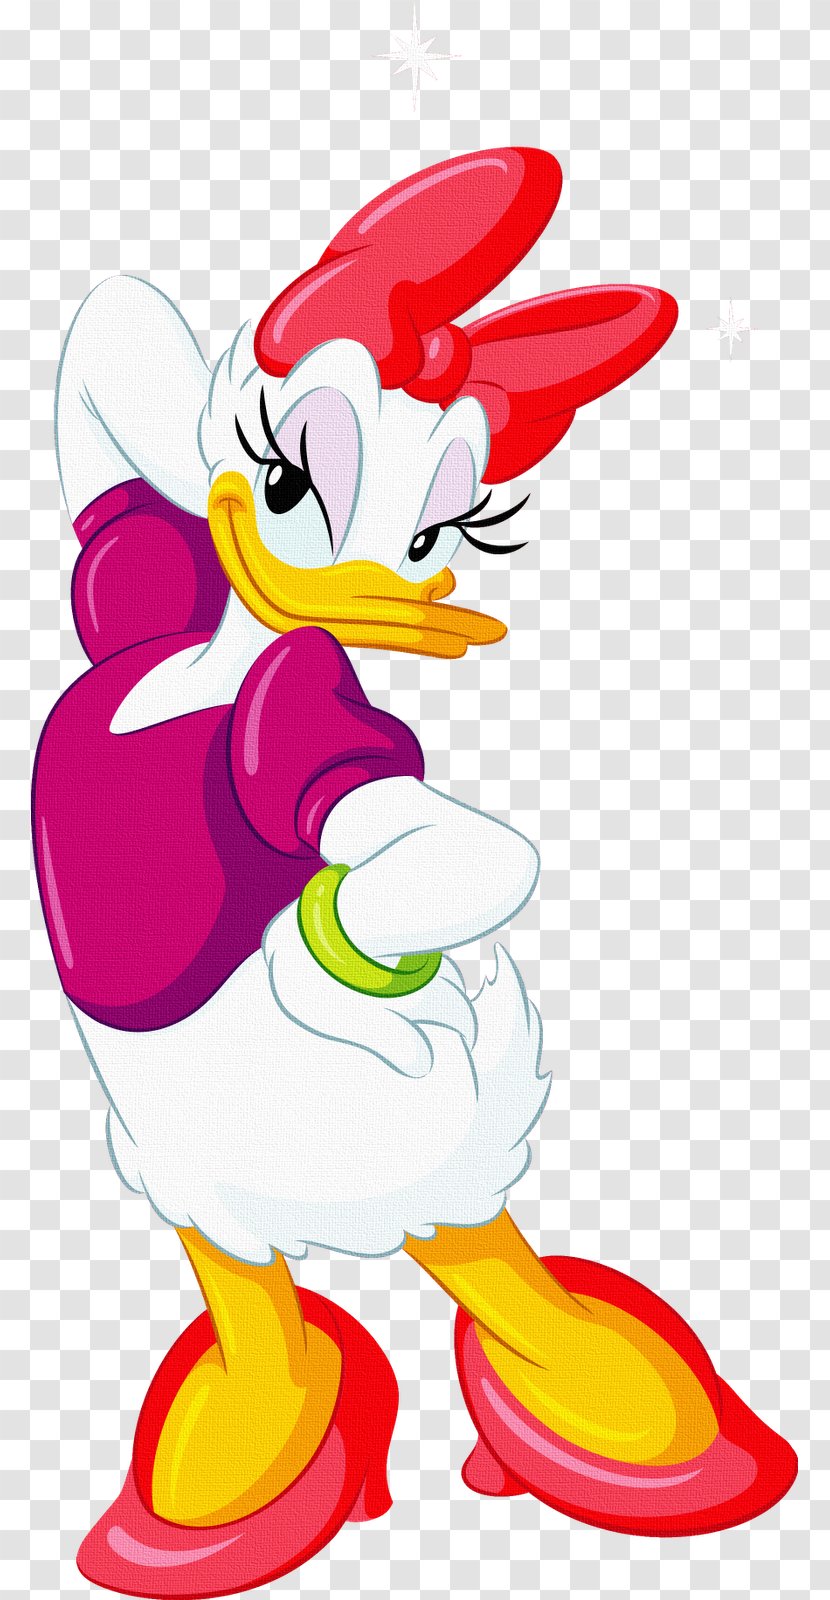 Mickey Mouse Daisy Duck Minnie Donald Pluto - Art - Disney Transparent PNG